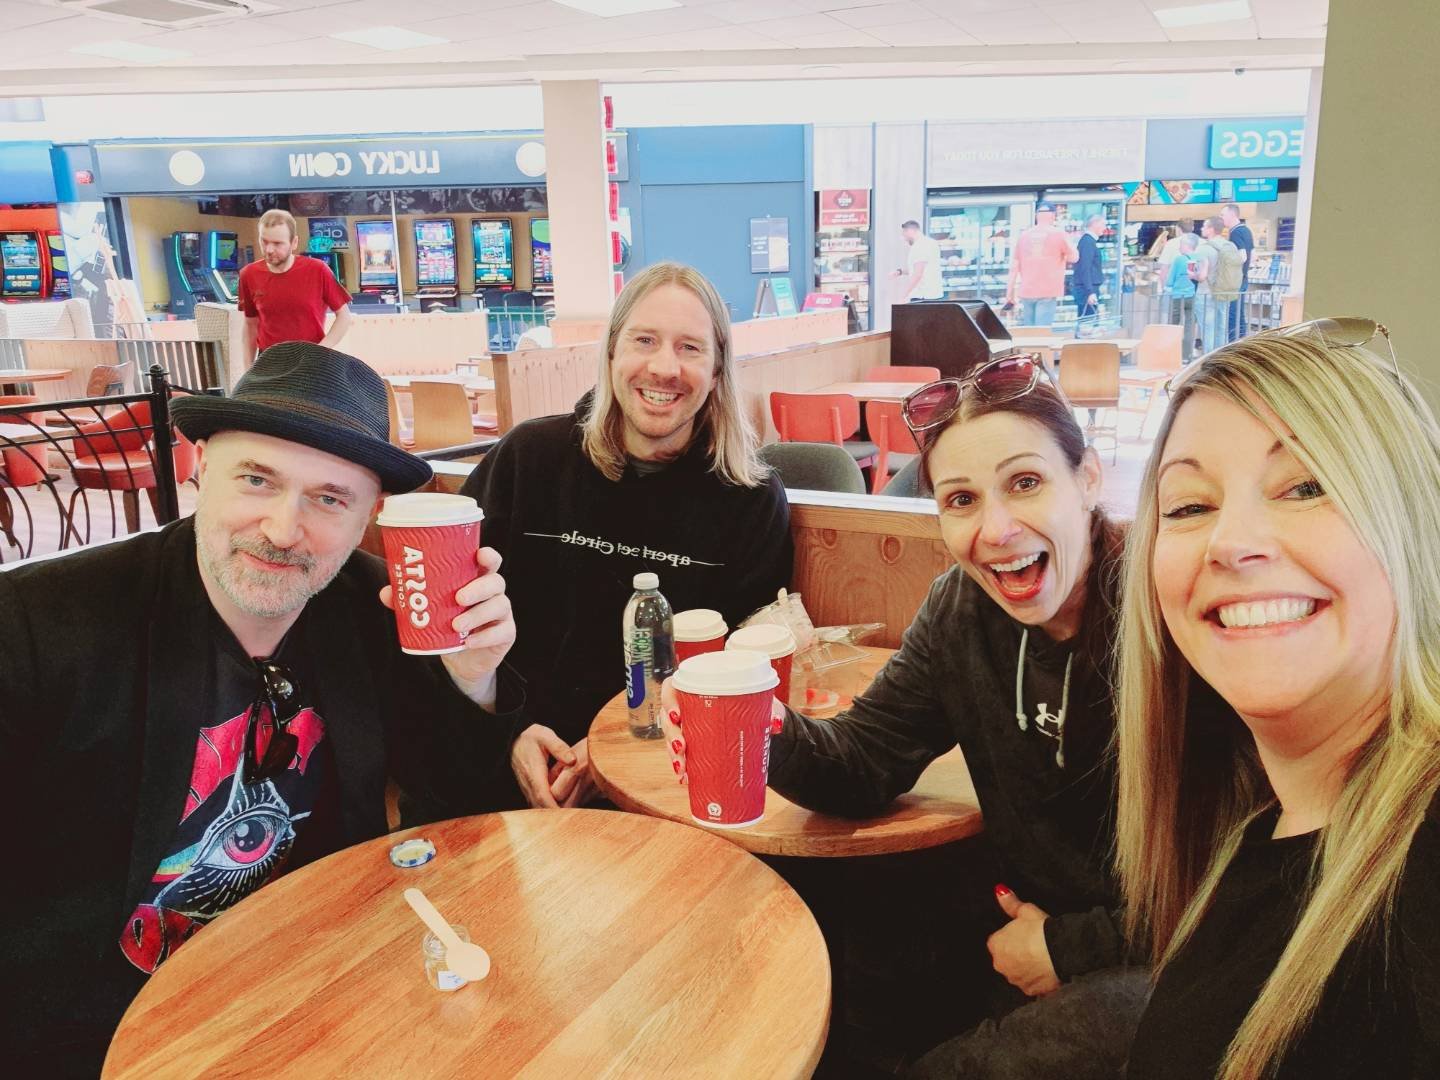 We only went and bumped into @fleetwoodbactribute on the way home from our gig! 🤪🎶😁 #servicestationrockstars